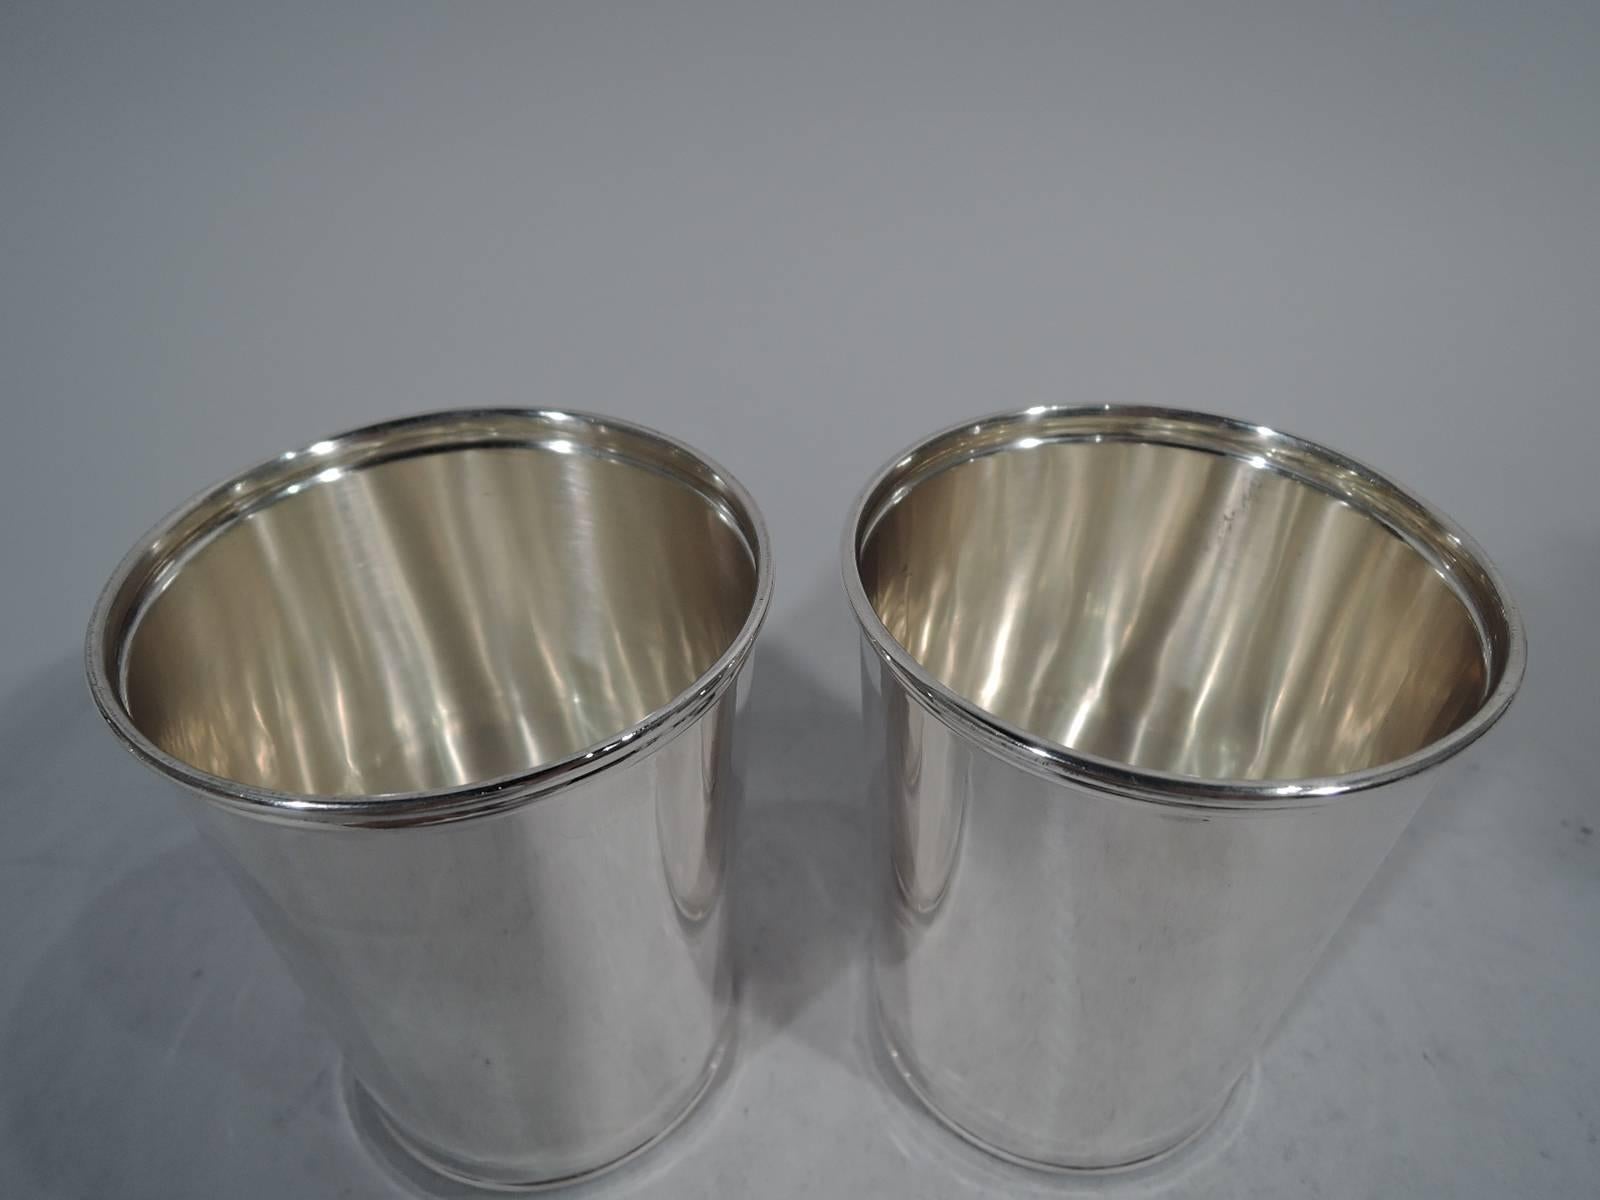 Pair of sterling silver mint julep cups. Made by Frank W. Smith in Gardner. Mass. Straight and tapering sides and molded rim. Nice barware by this maker, who was active until the late 1950s. Hallmark includes no. G106. Total weight: 5.4 troy ounces.